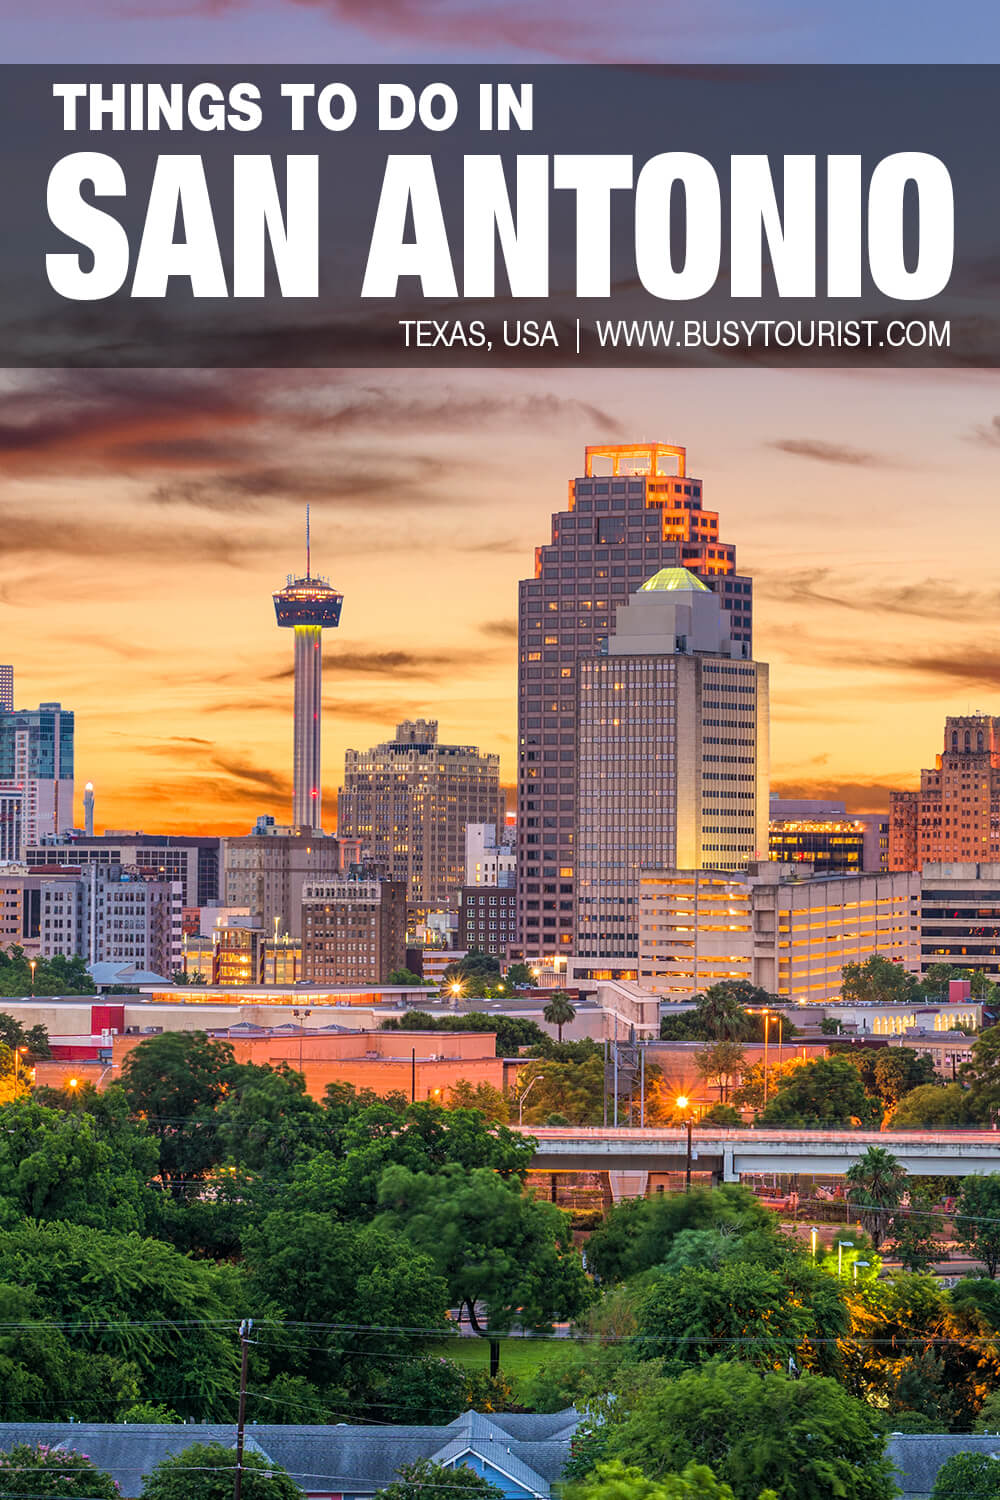 Best Fun Things To Do In San Antonio Tx Attractions Activities